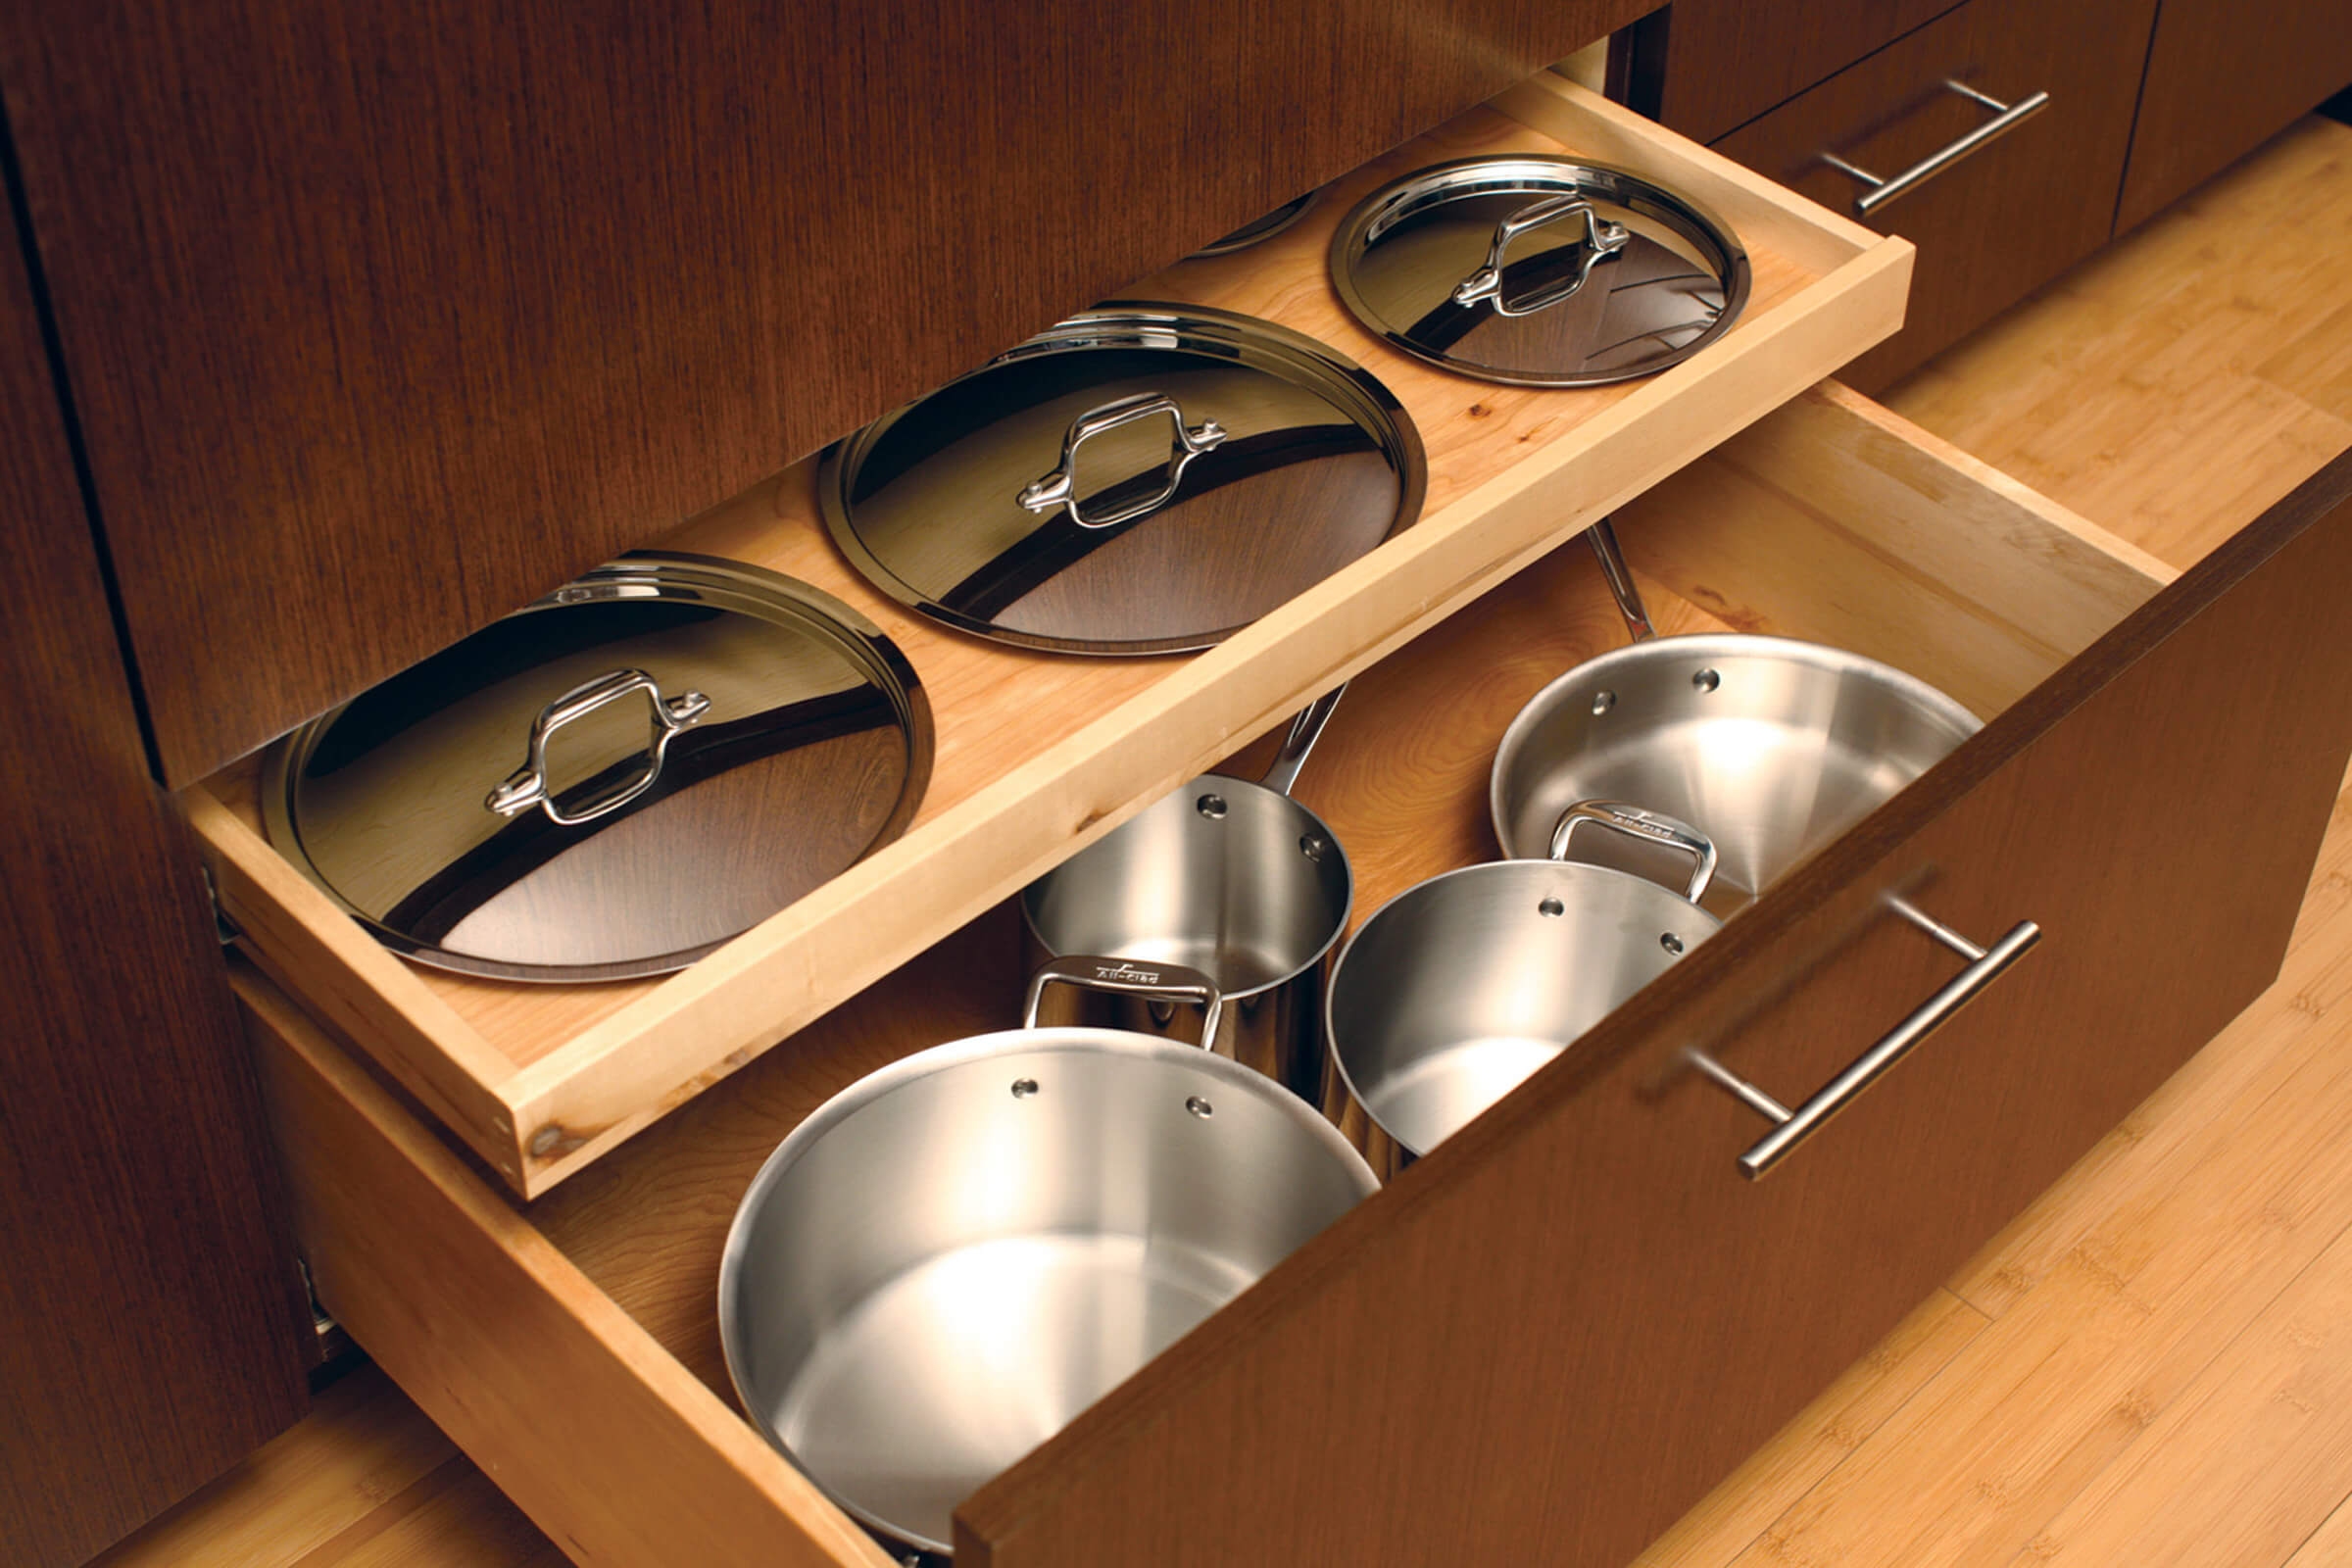 A Shallow Roll-Out Above Drawer neatly stores the lids for the pots and pans that are stored in the deep drawer below.